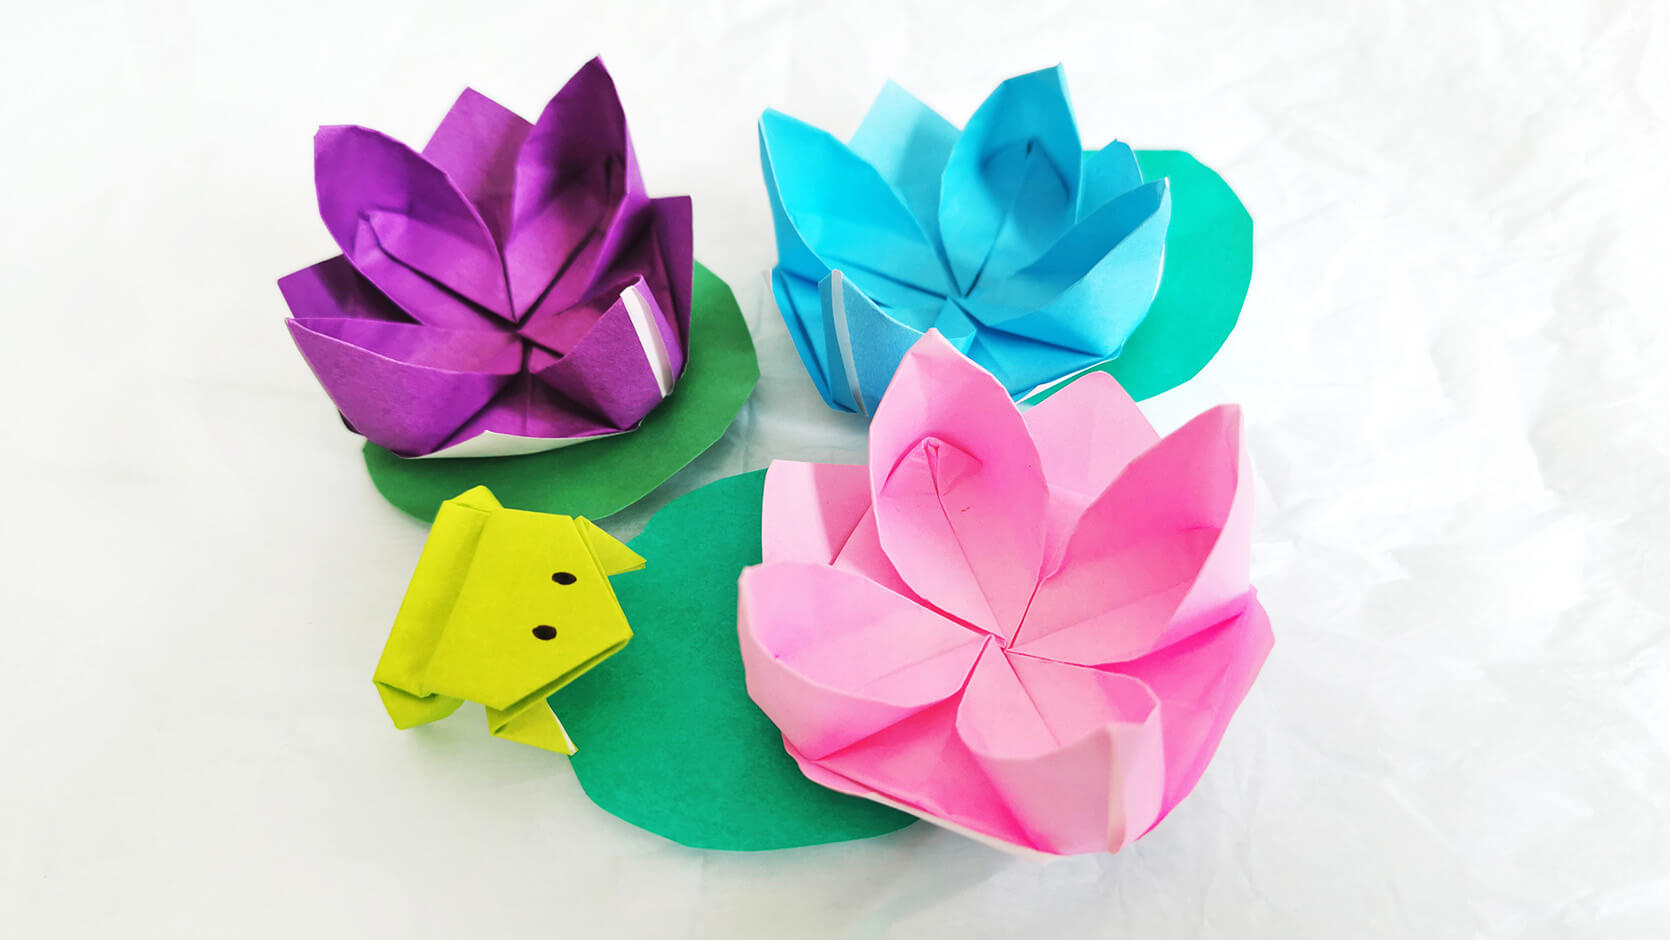 How To Make An Origami Lily Flower - Folding Instructions